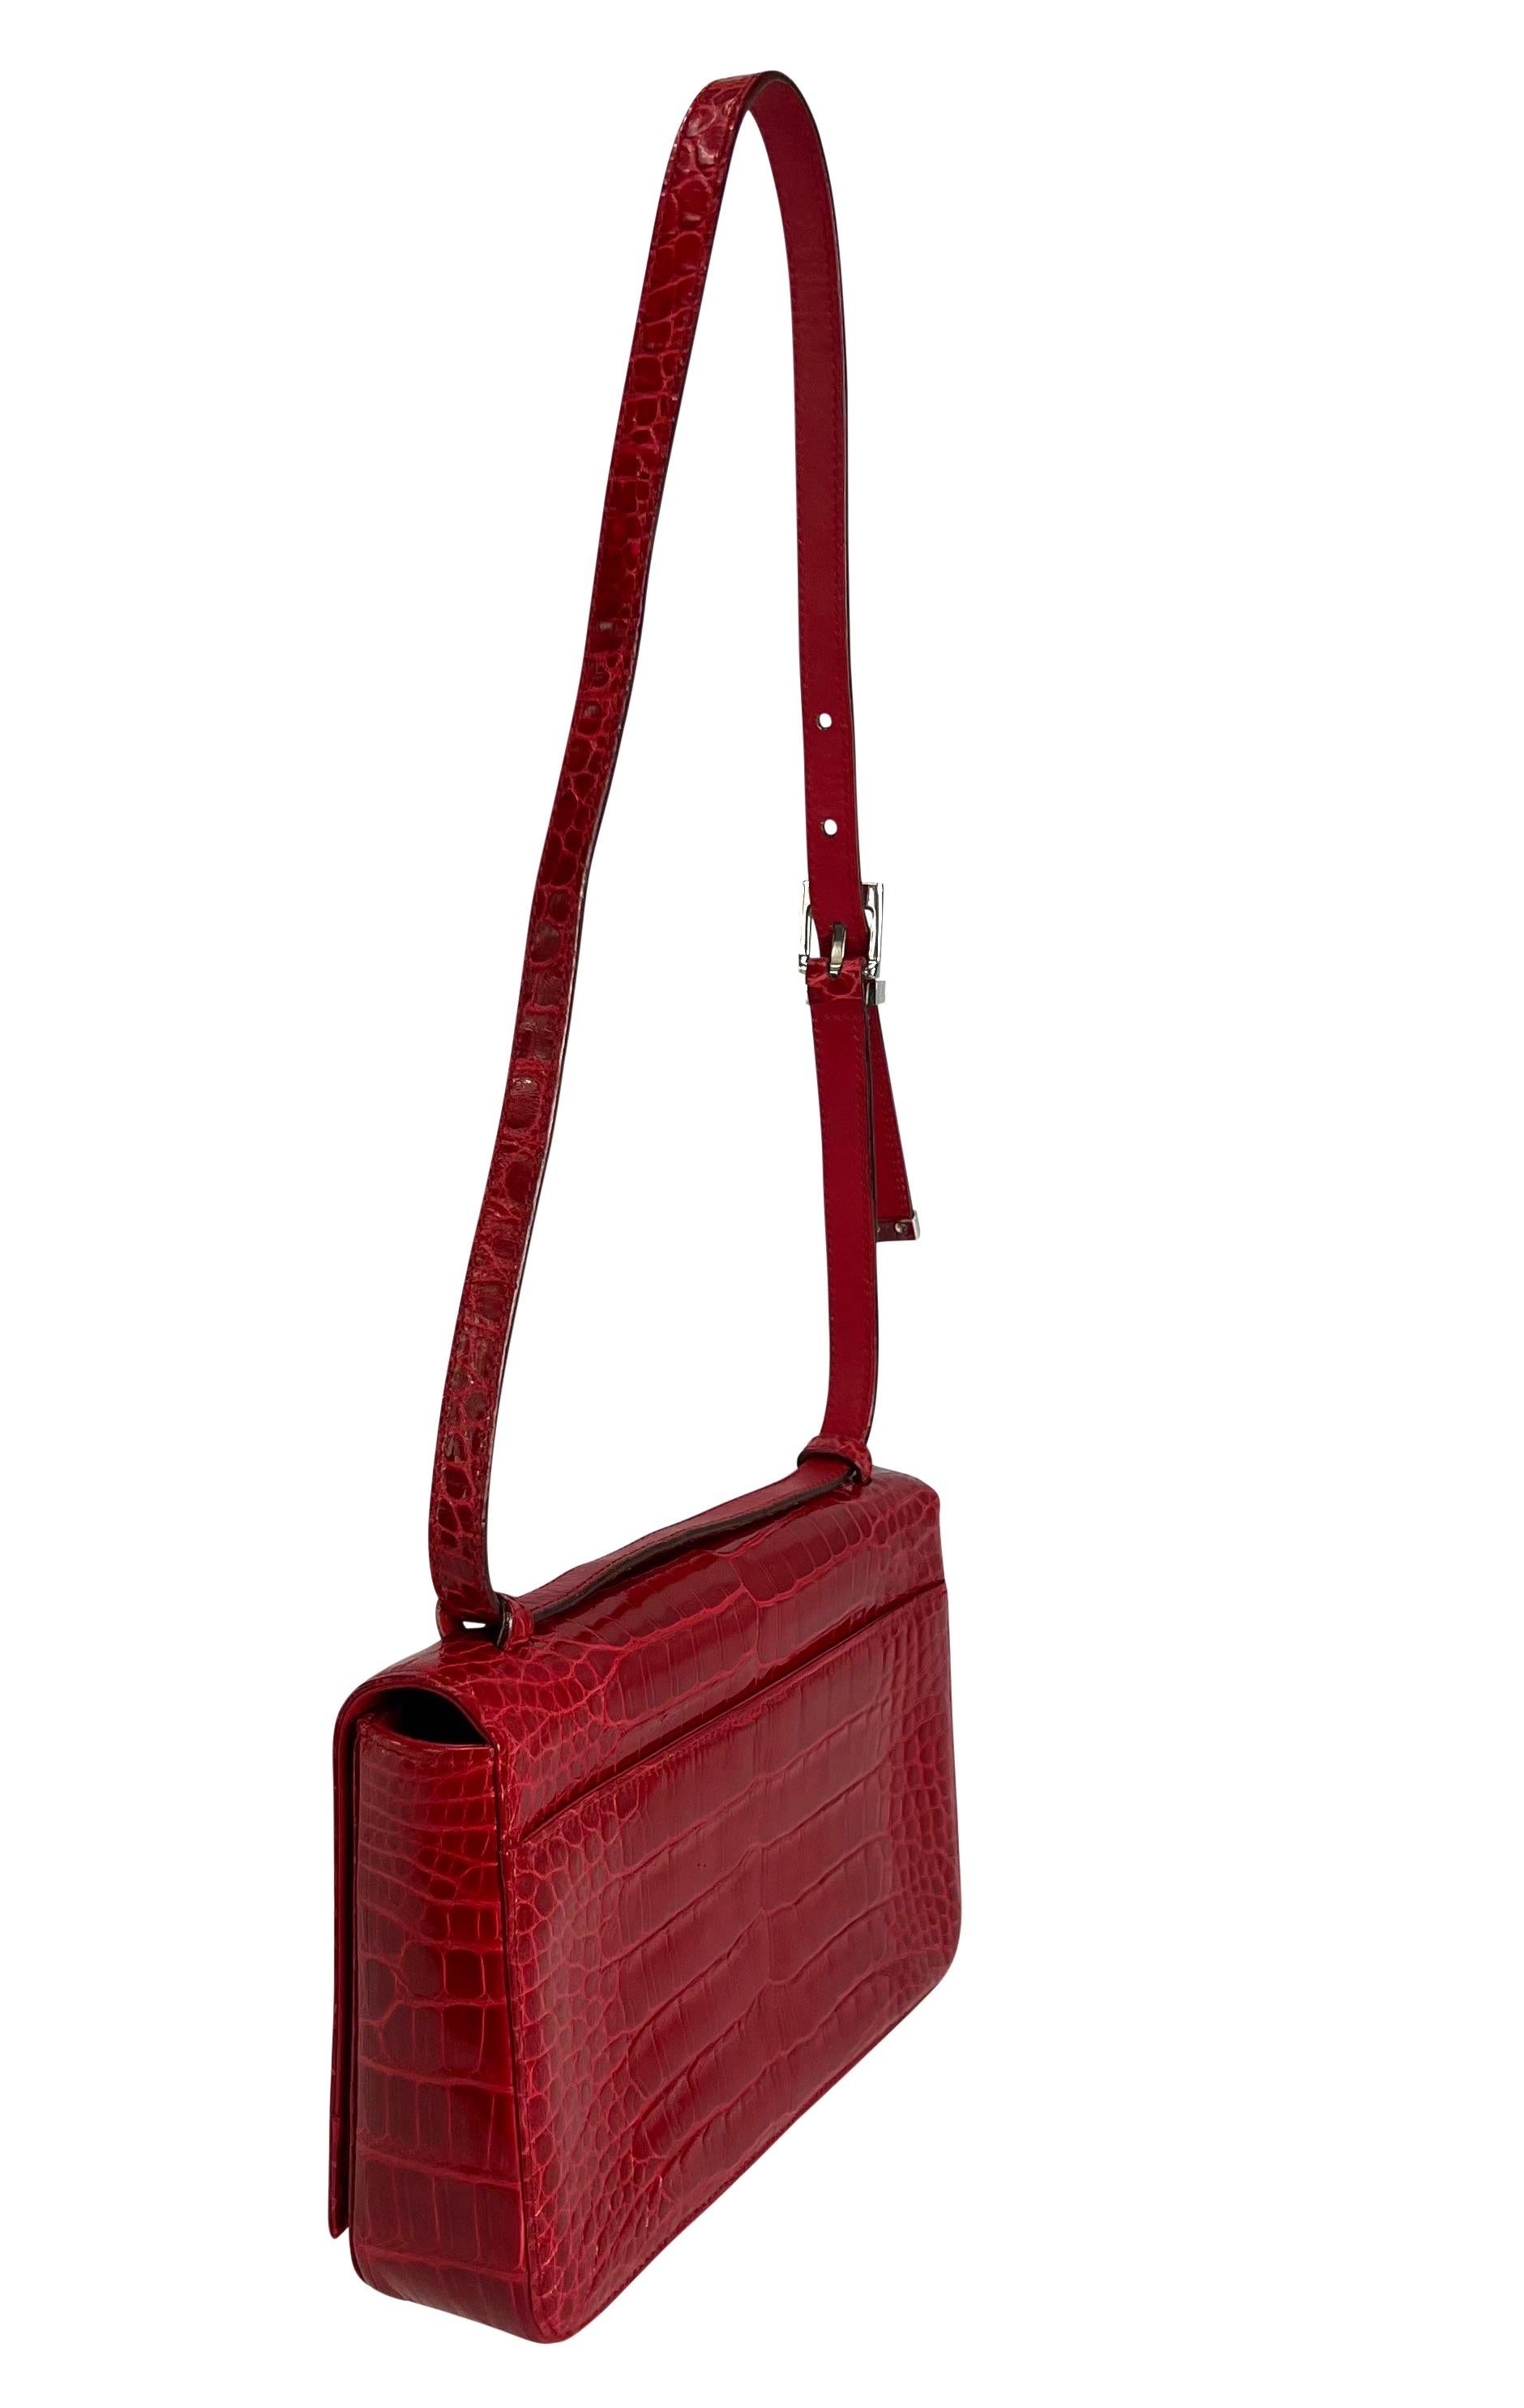 S/S 1998 Gucci by Tom Ford Runway Red Alligator Adjustable Crossbody G Logo Bag For Sale 2